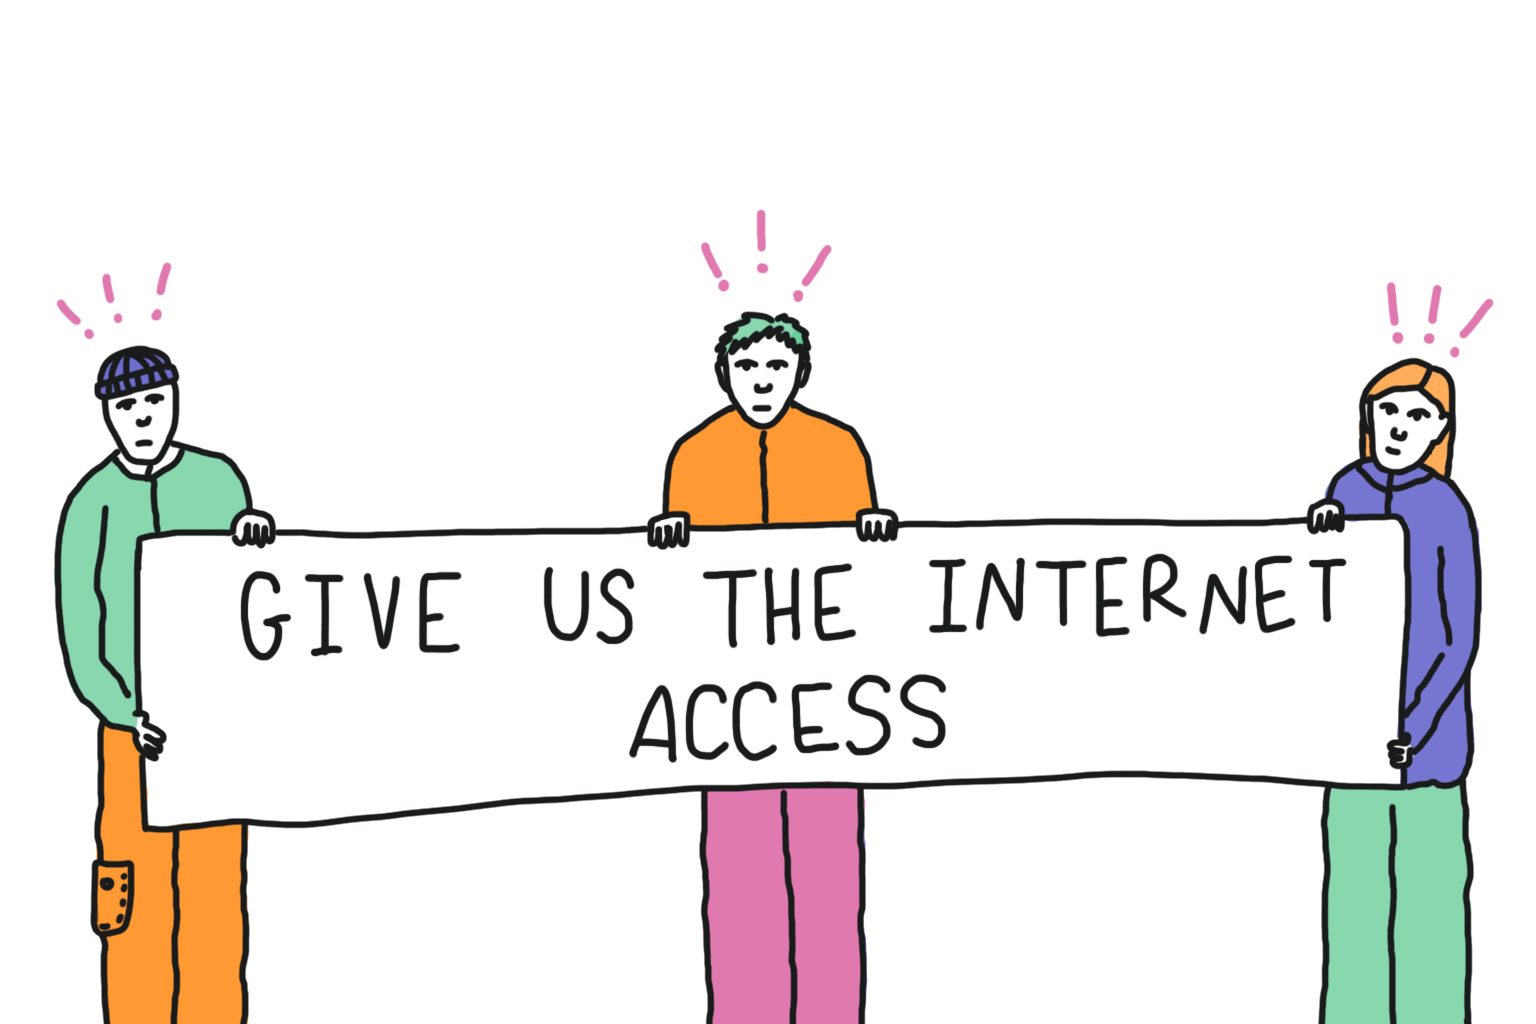 internet access is not a human right